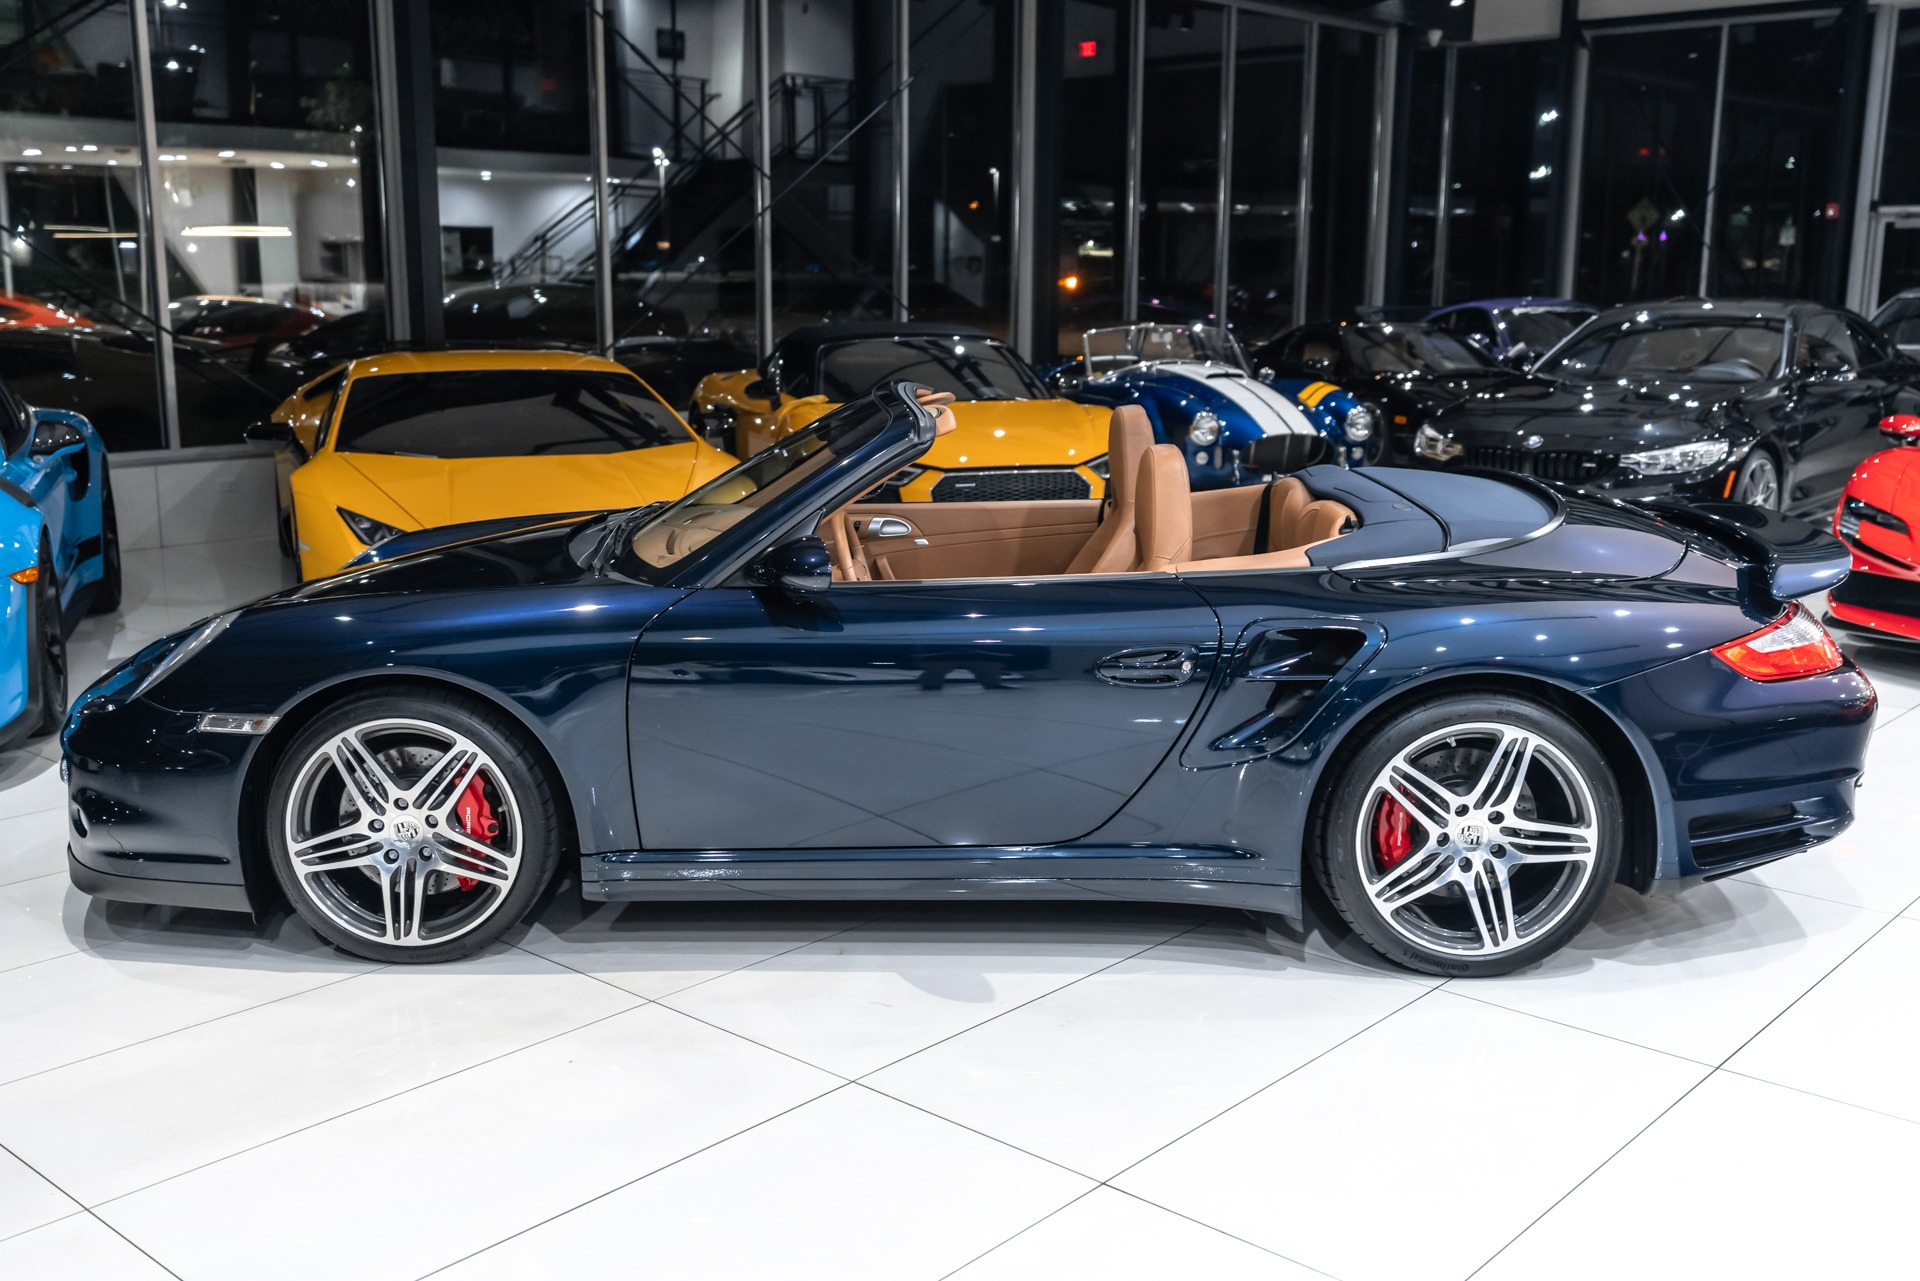 Used-2008-Porsche-911-Turbo-Cabriolet-6-Speed-Manual-ONLY-17k-Miles-Supple-Leather-STUNNING